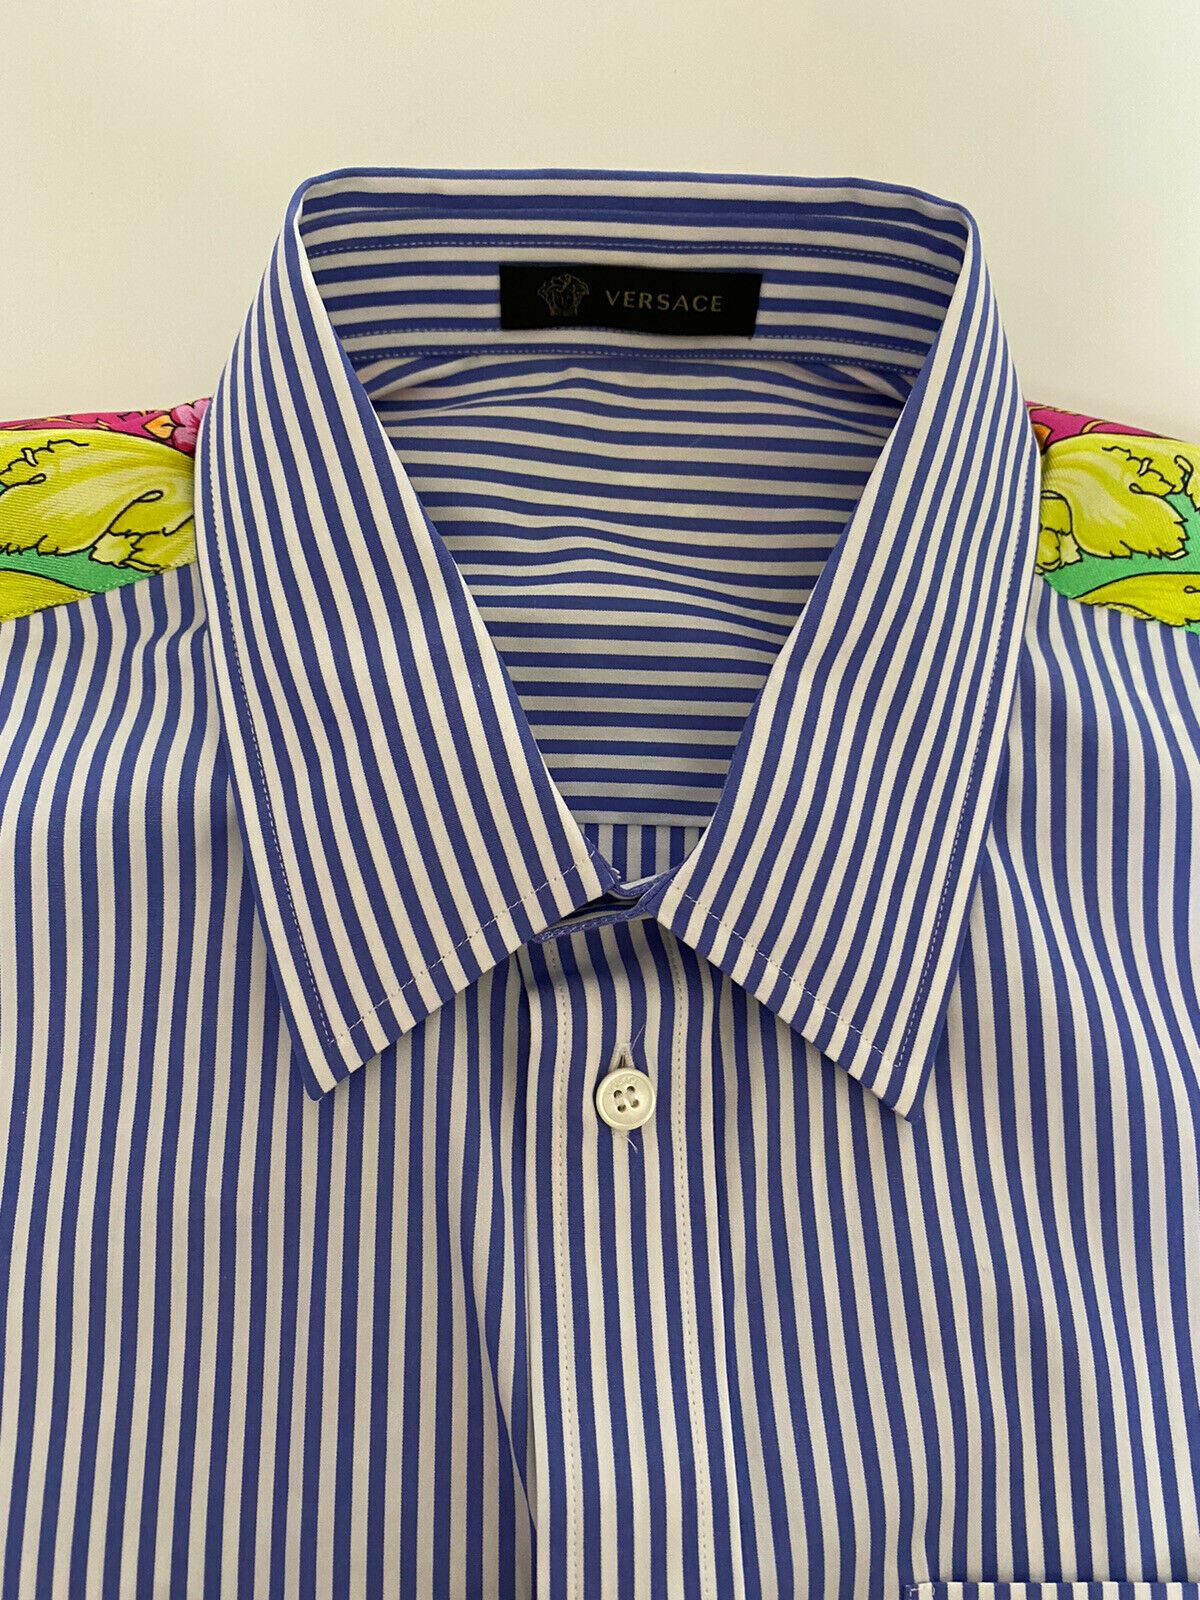 NWT $795 Versace Blue Stripe and Graphic Print Dress Shirt Size 42 A83115 Italy